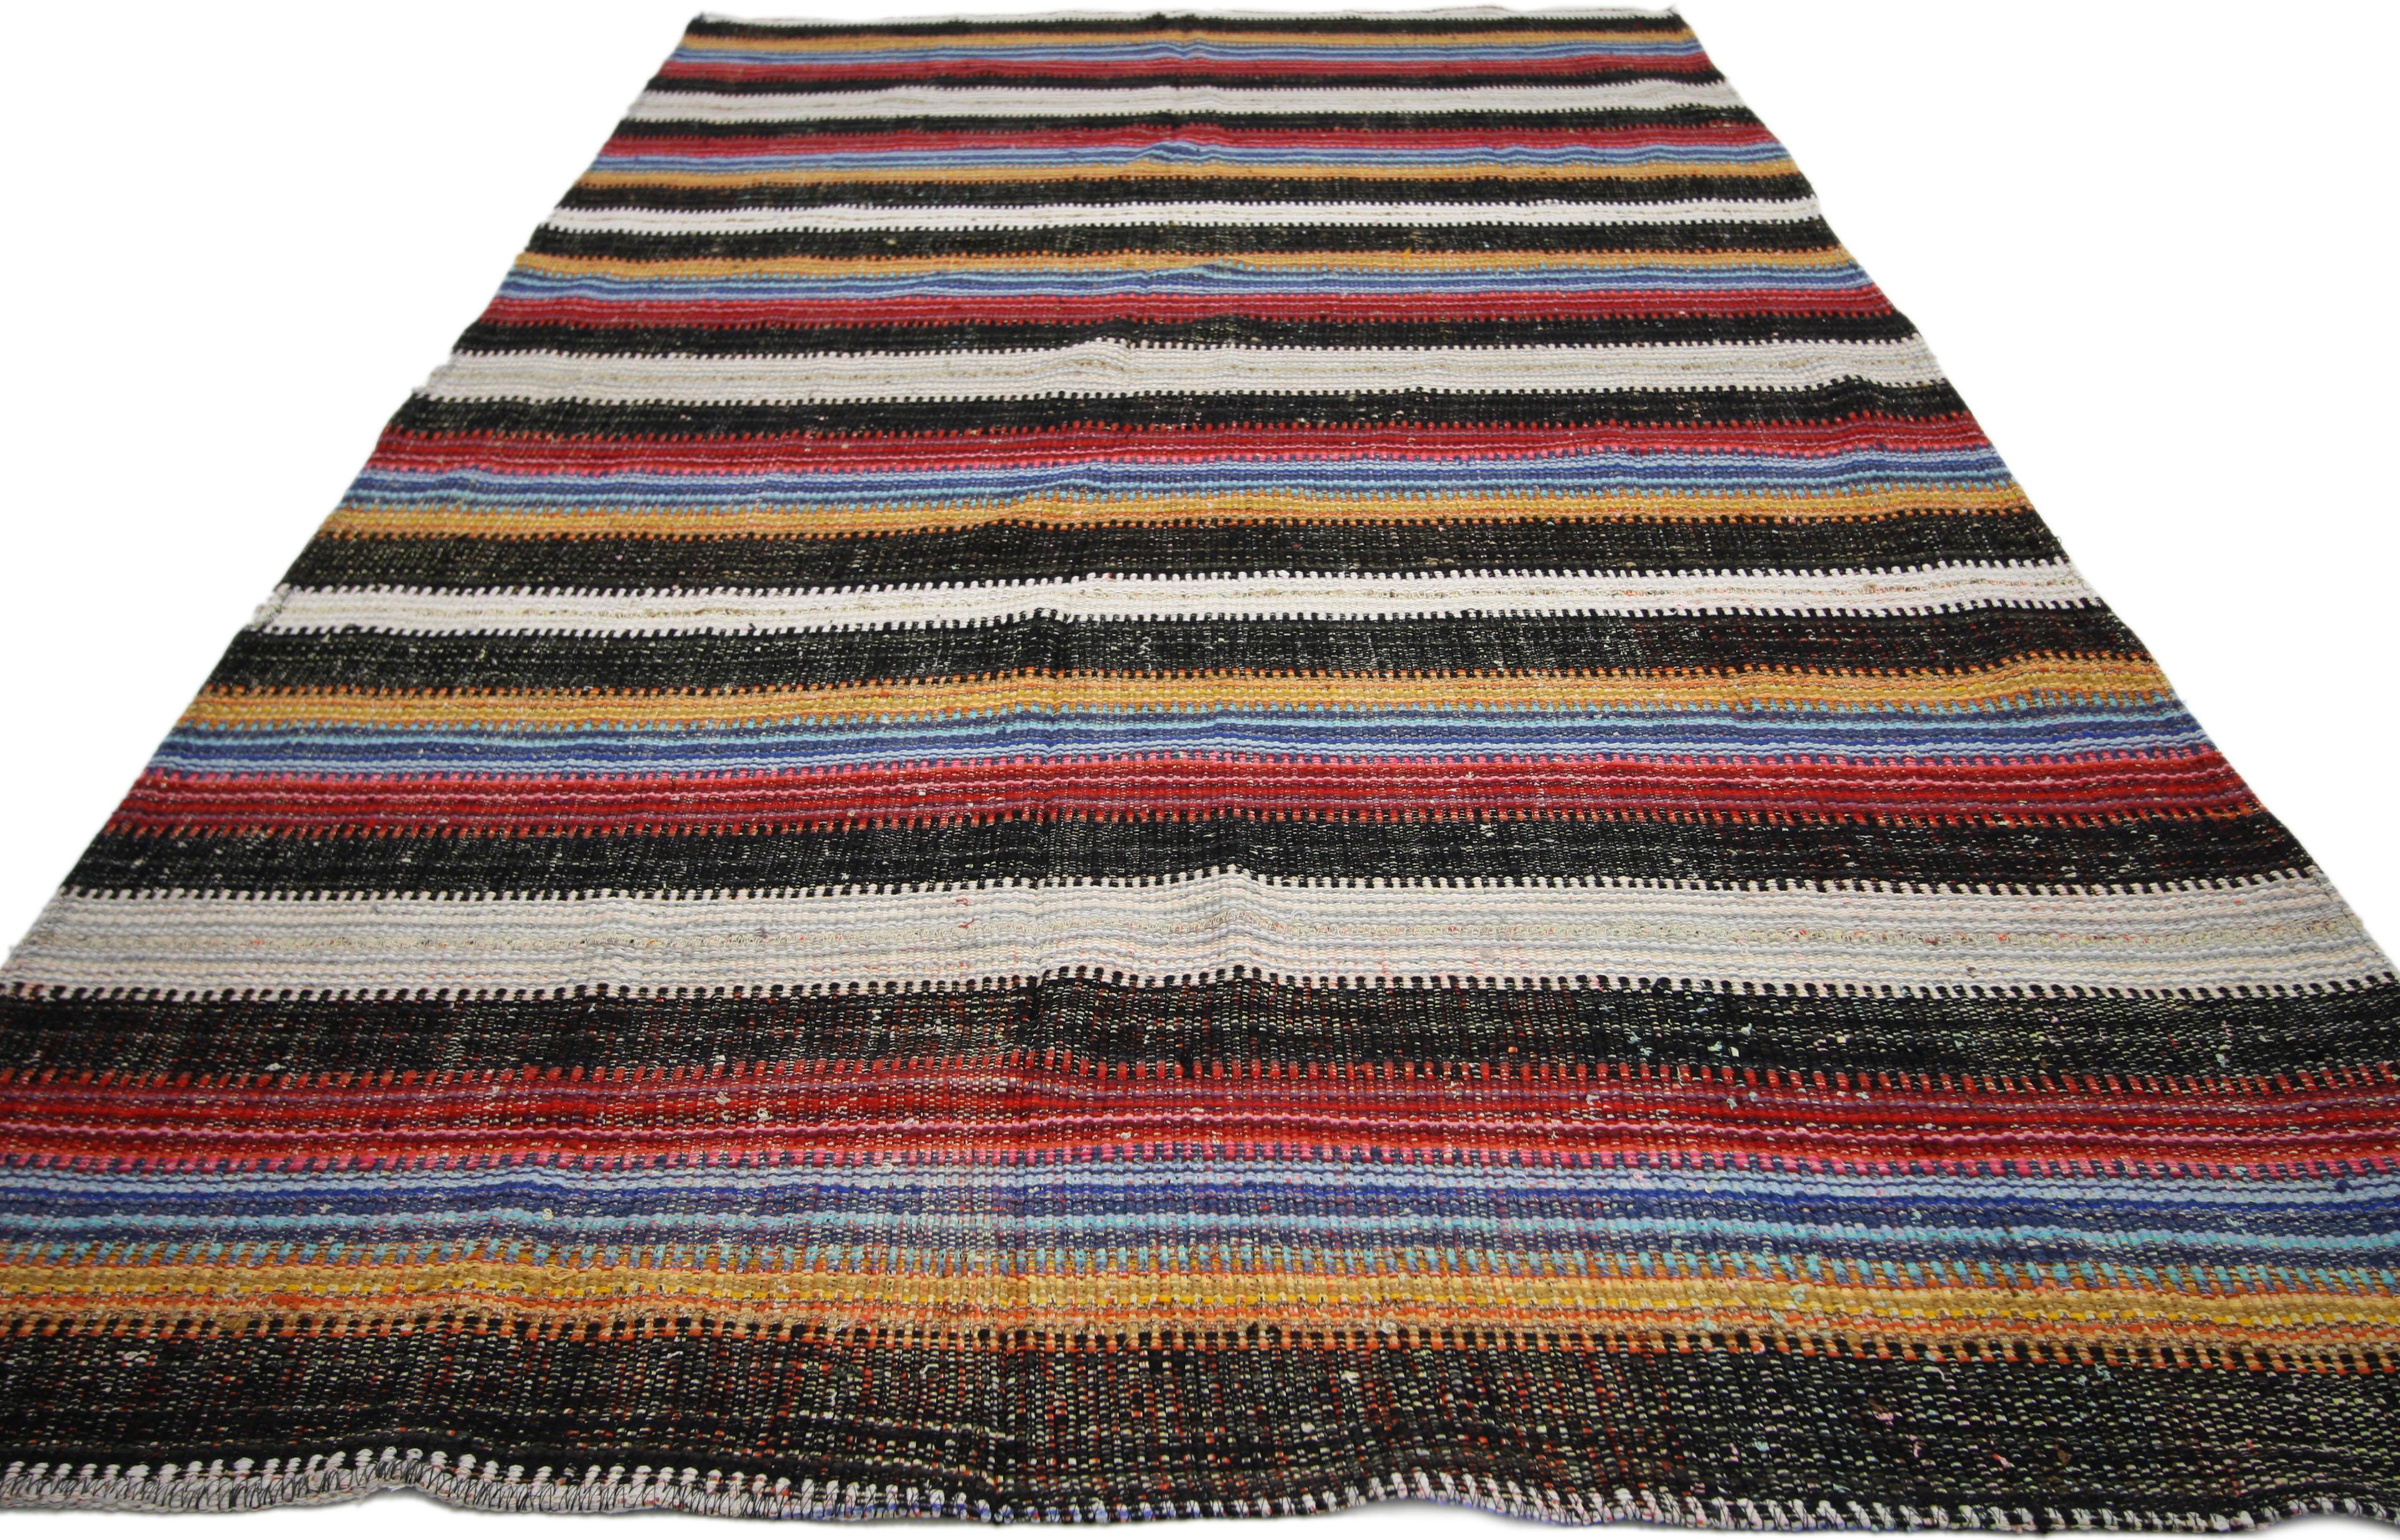 Hand-Woven Vintage Turkish Jajim Striped Kilim Area Rug with American Colonial Style